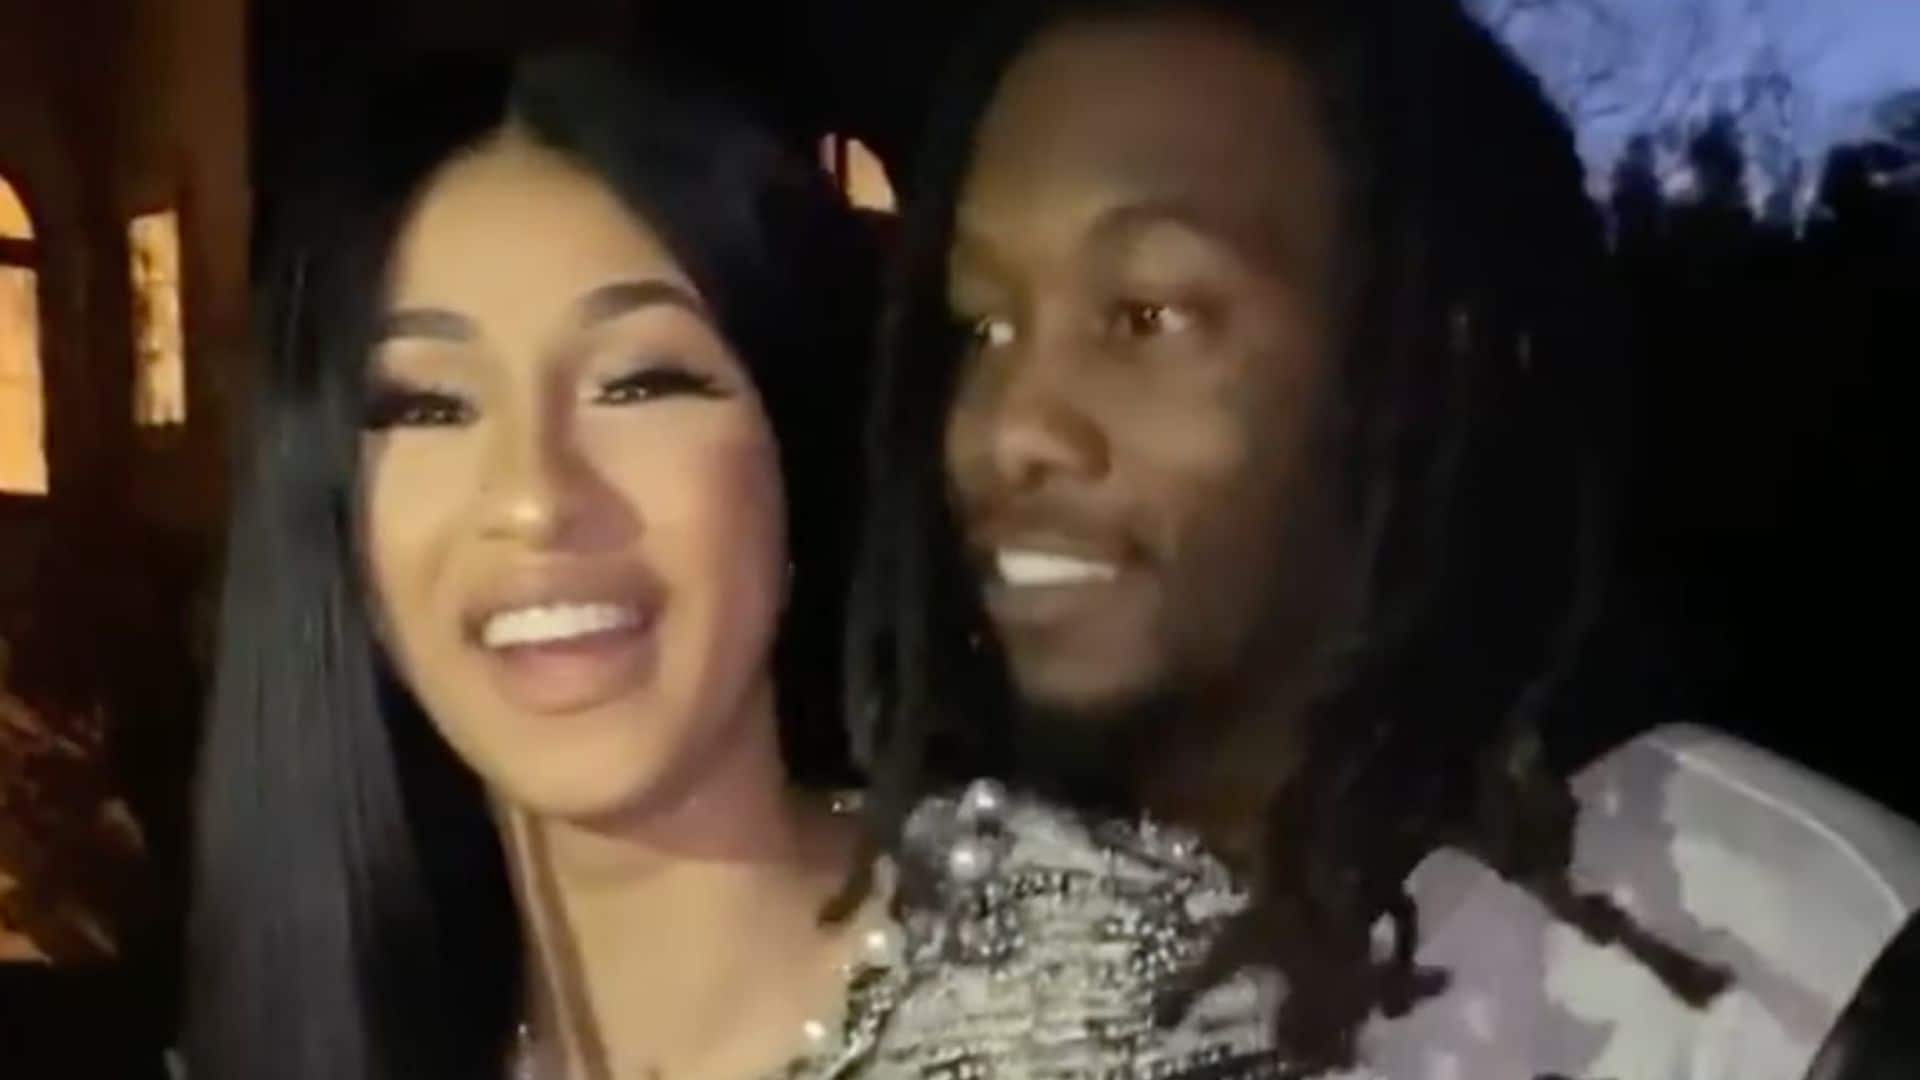 Cardi B and Offset give fans a behind-the-scenes look inside their new Atlanta mansion